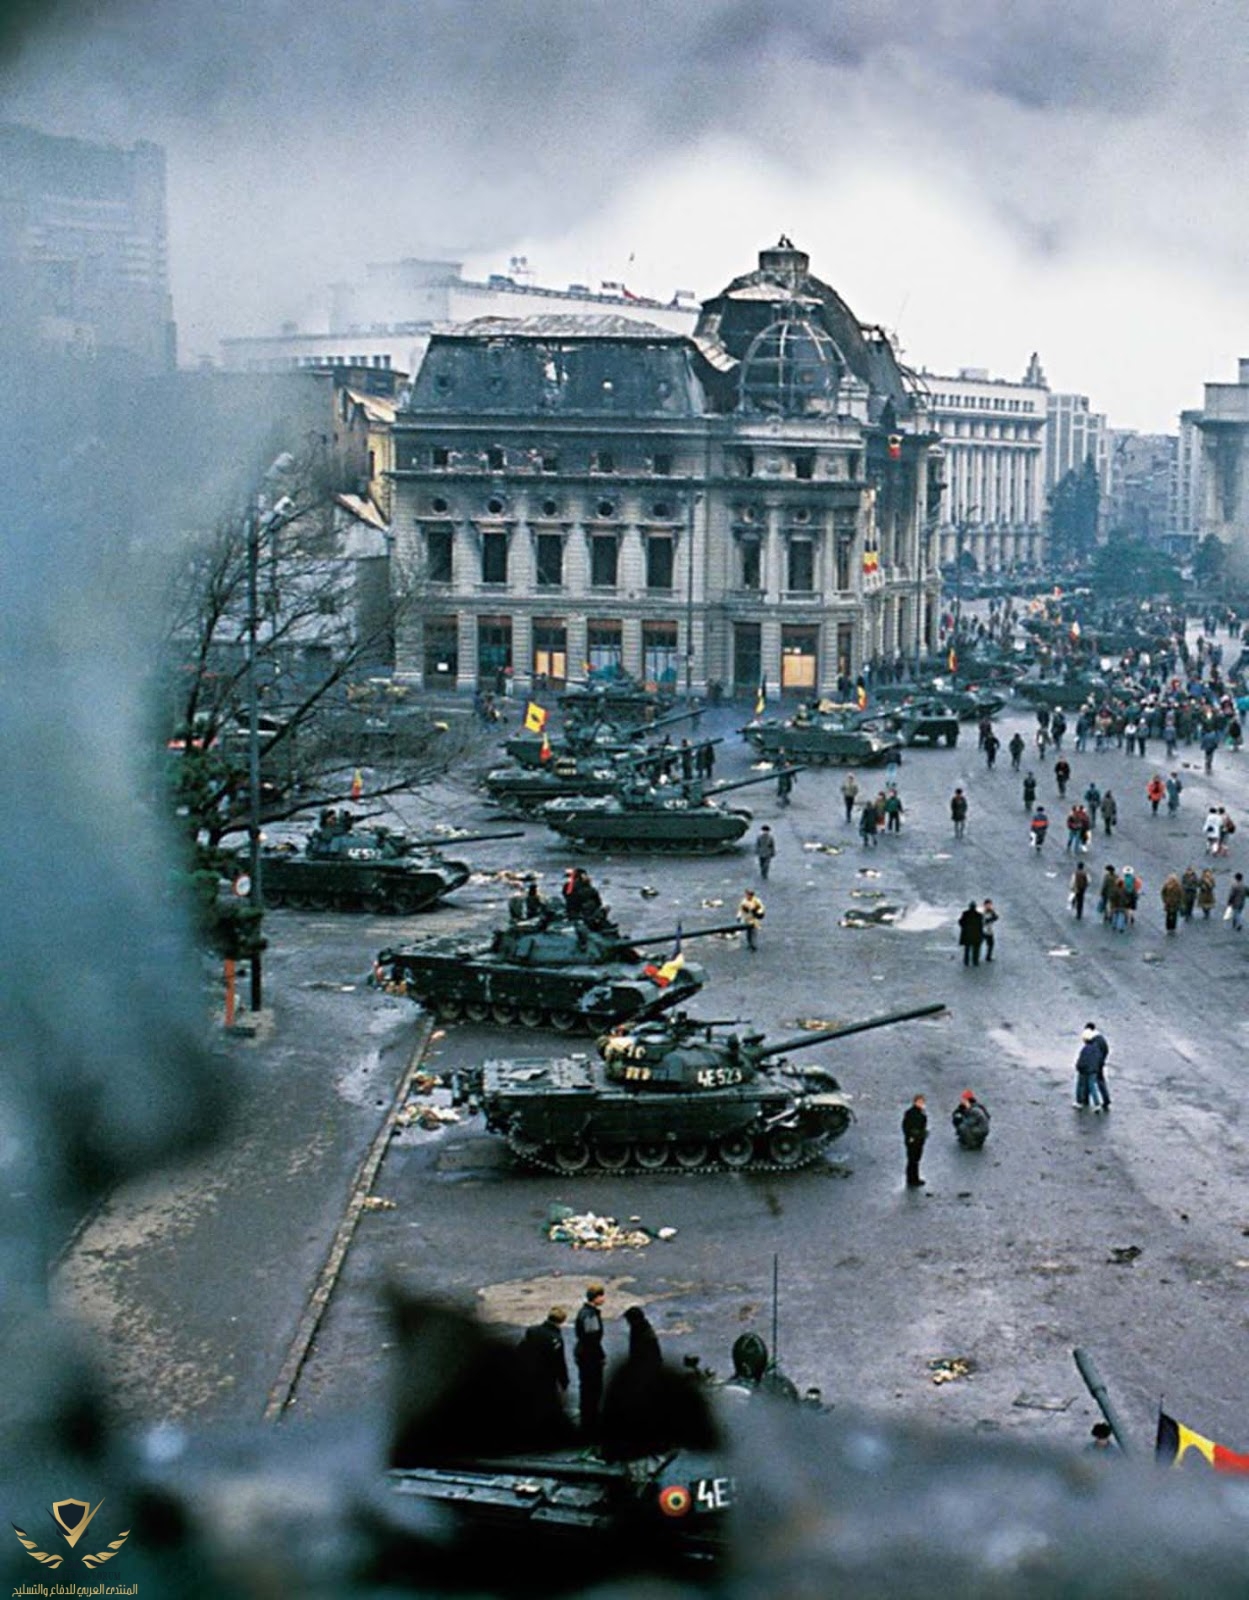 Romanian Revolution in pictures, 1989 (5).jpg